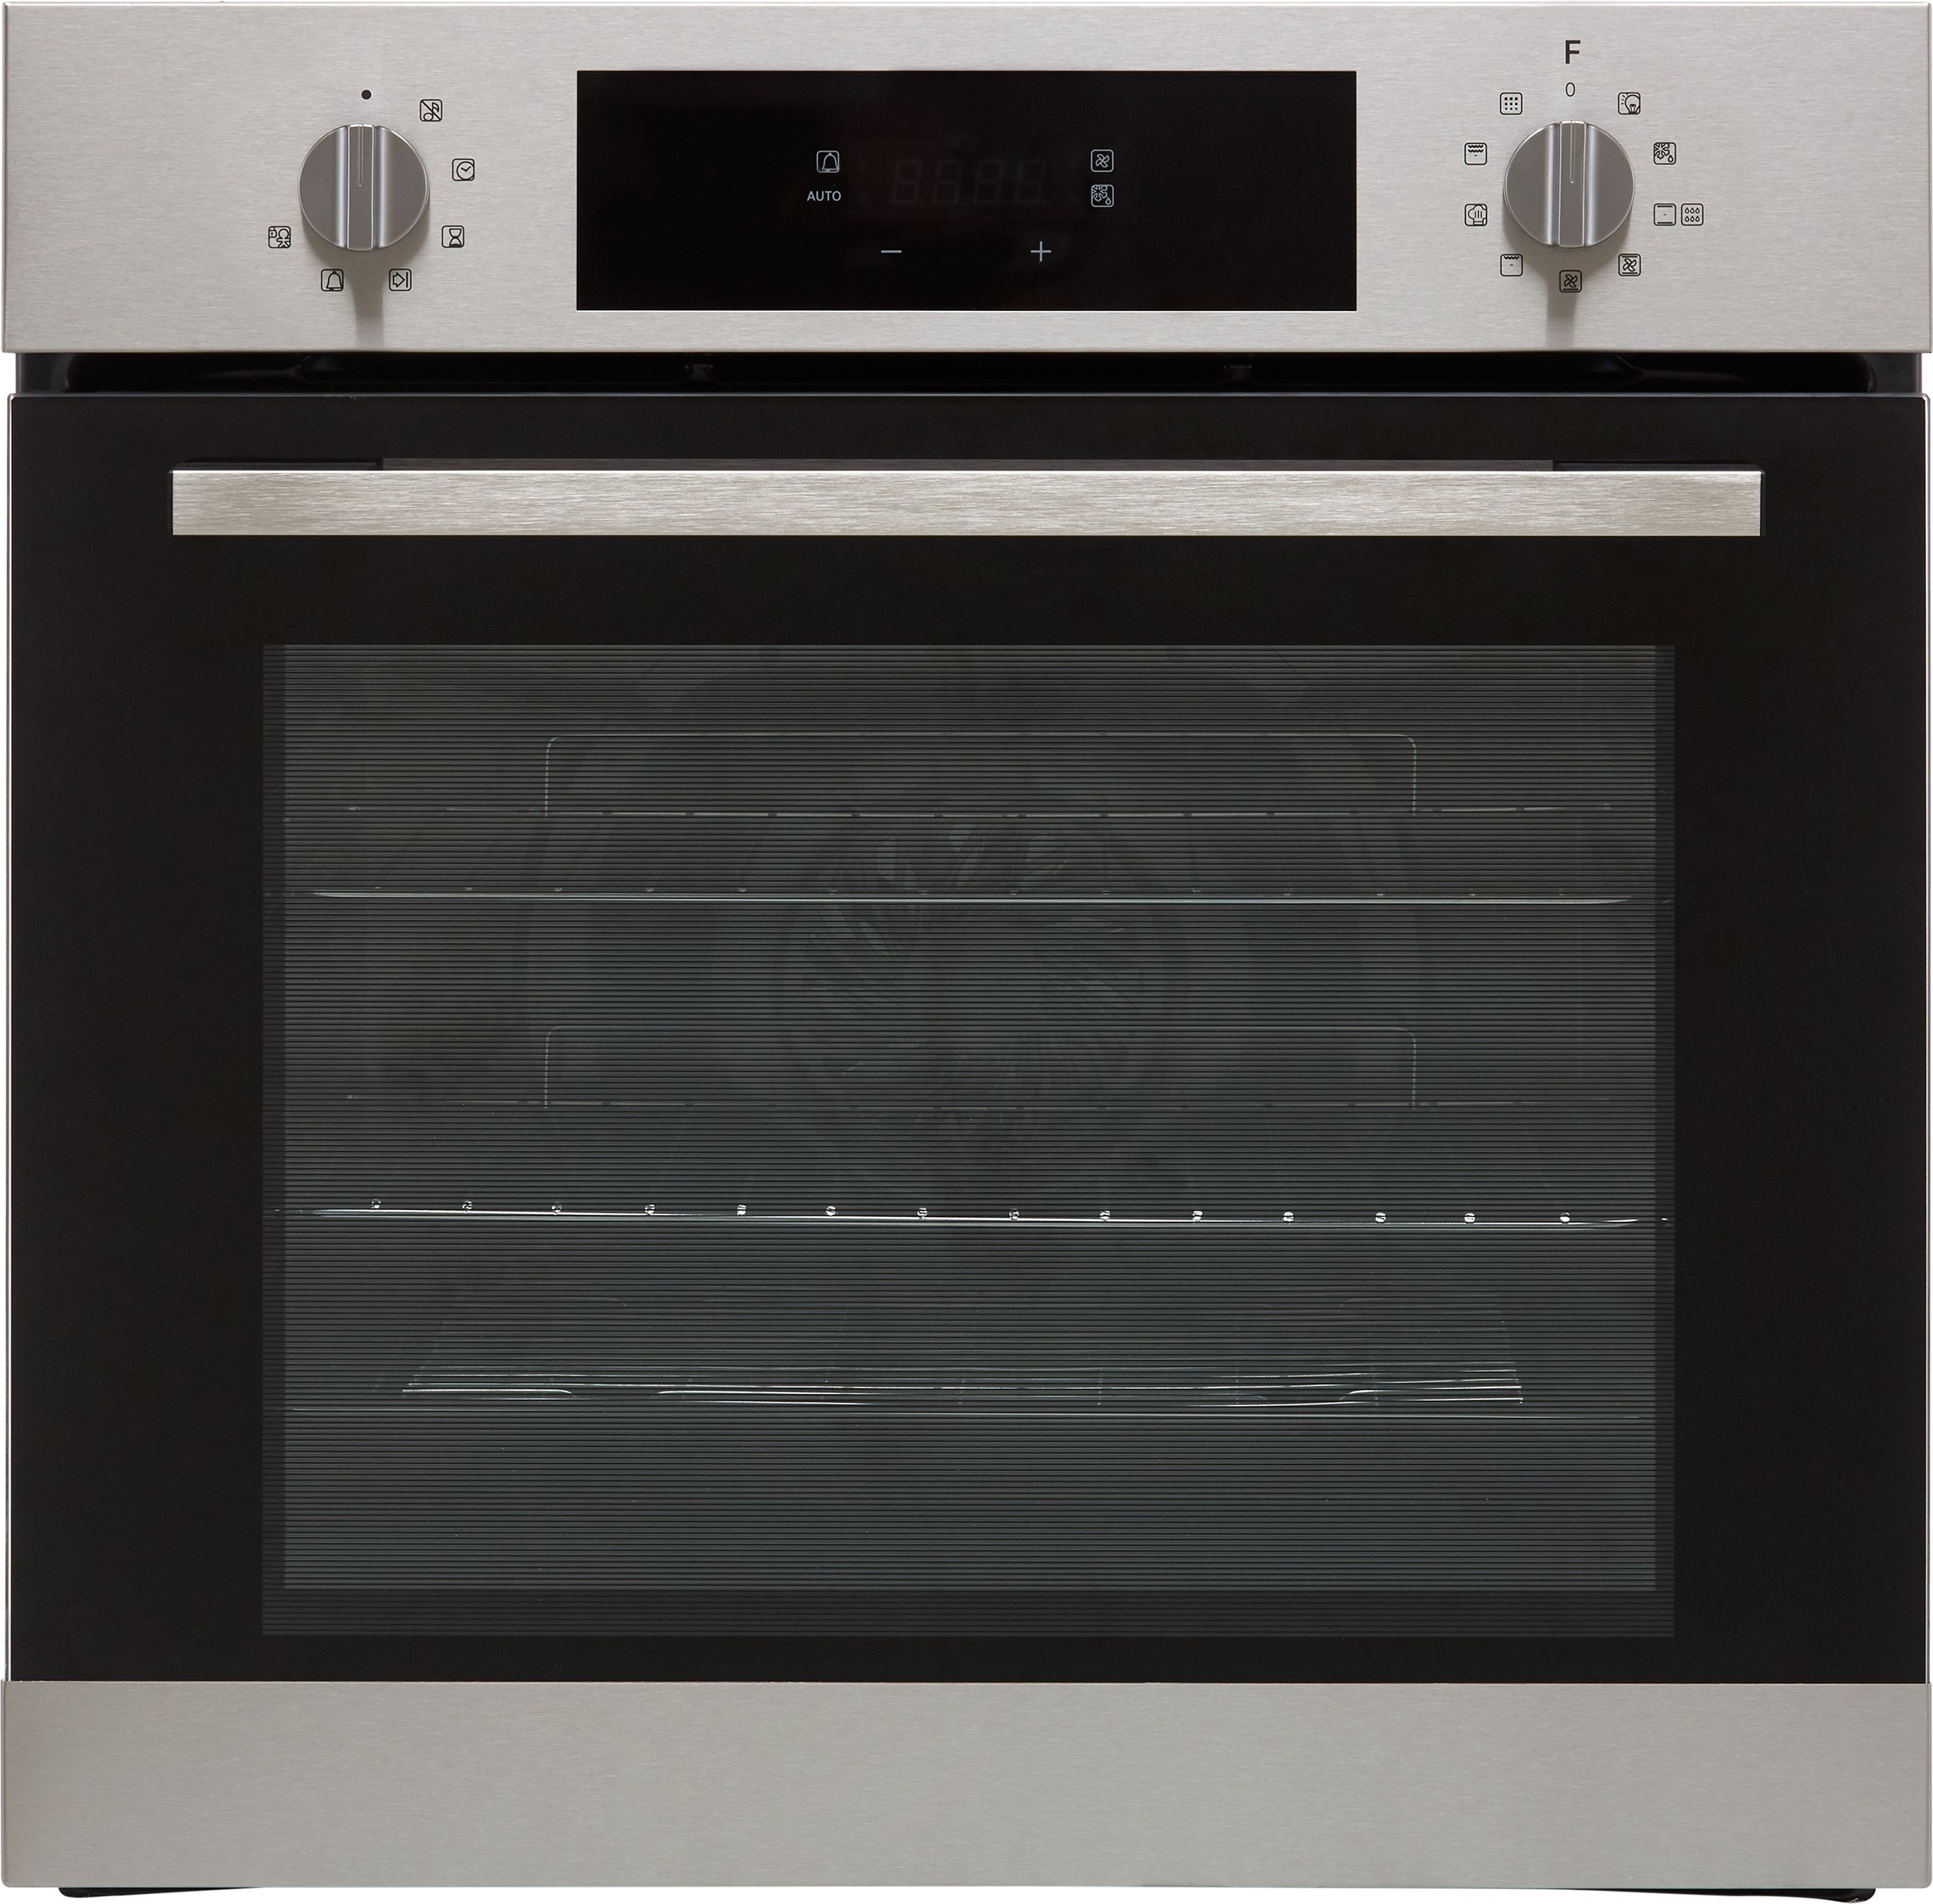 Hoover H-OVEN 300 HOC3BF5558IN Built In Electric Single Oven and Pyrolytic Cleaning - Stainless Steel - A Rated, Stainless Steel